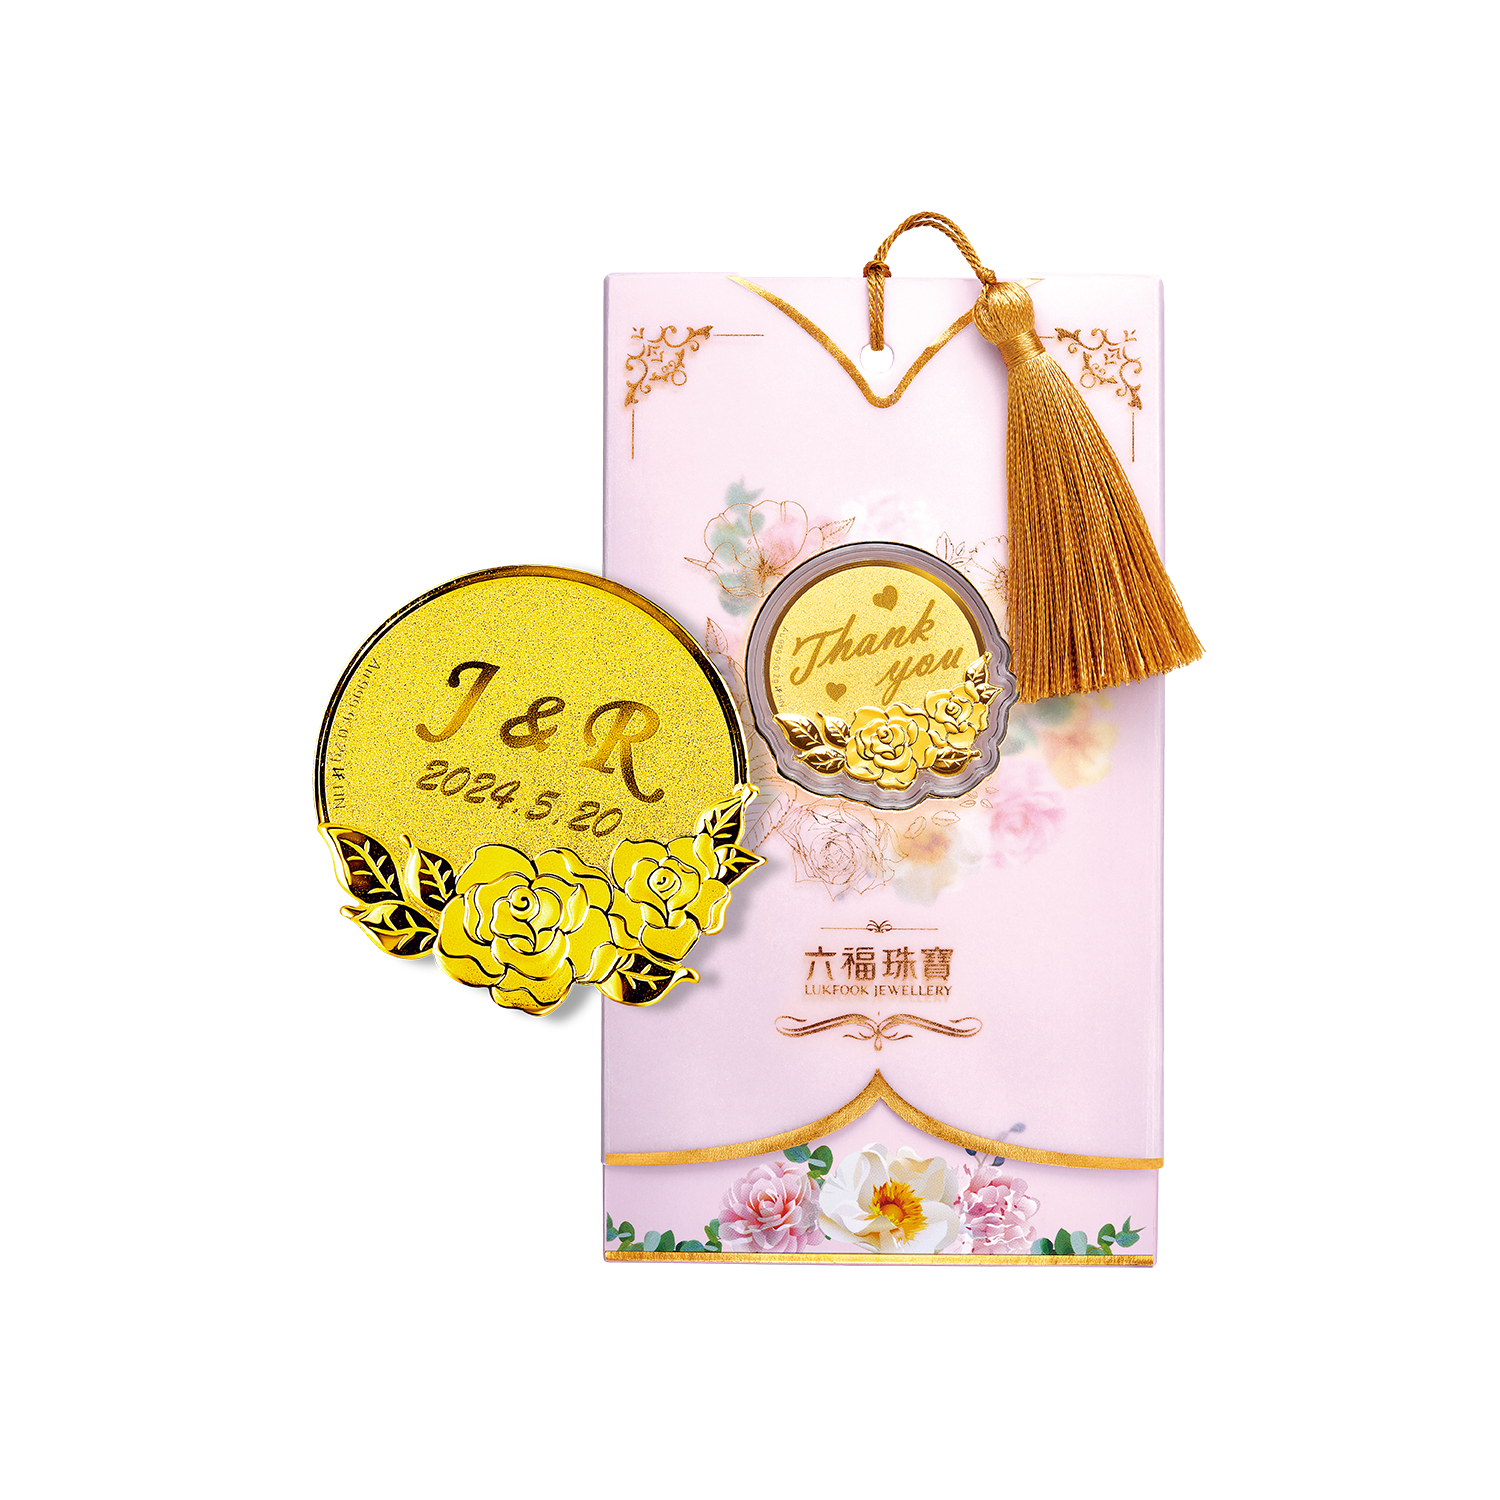 Beloved Collection "Happily Married" Gold Coin